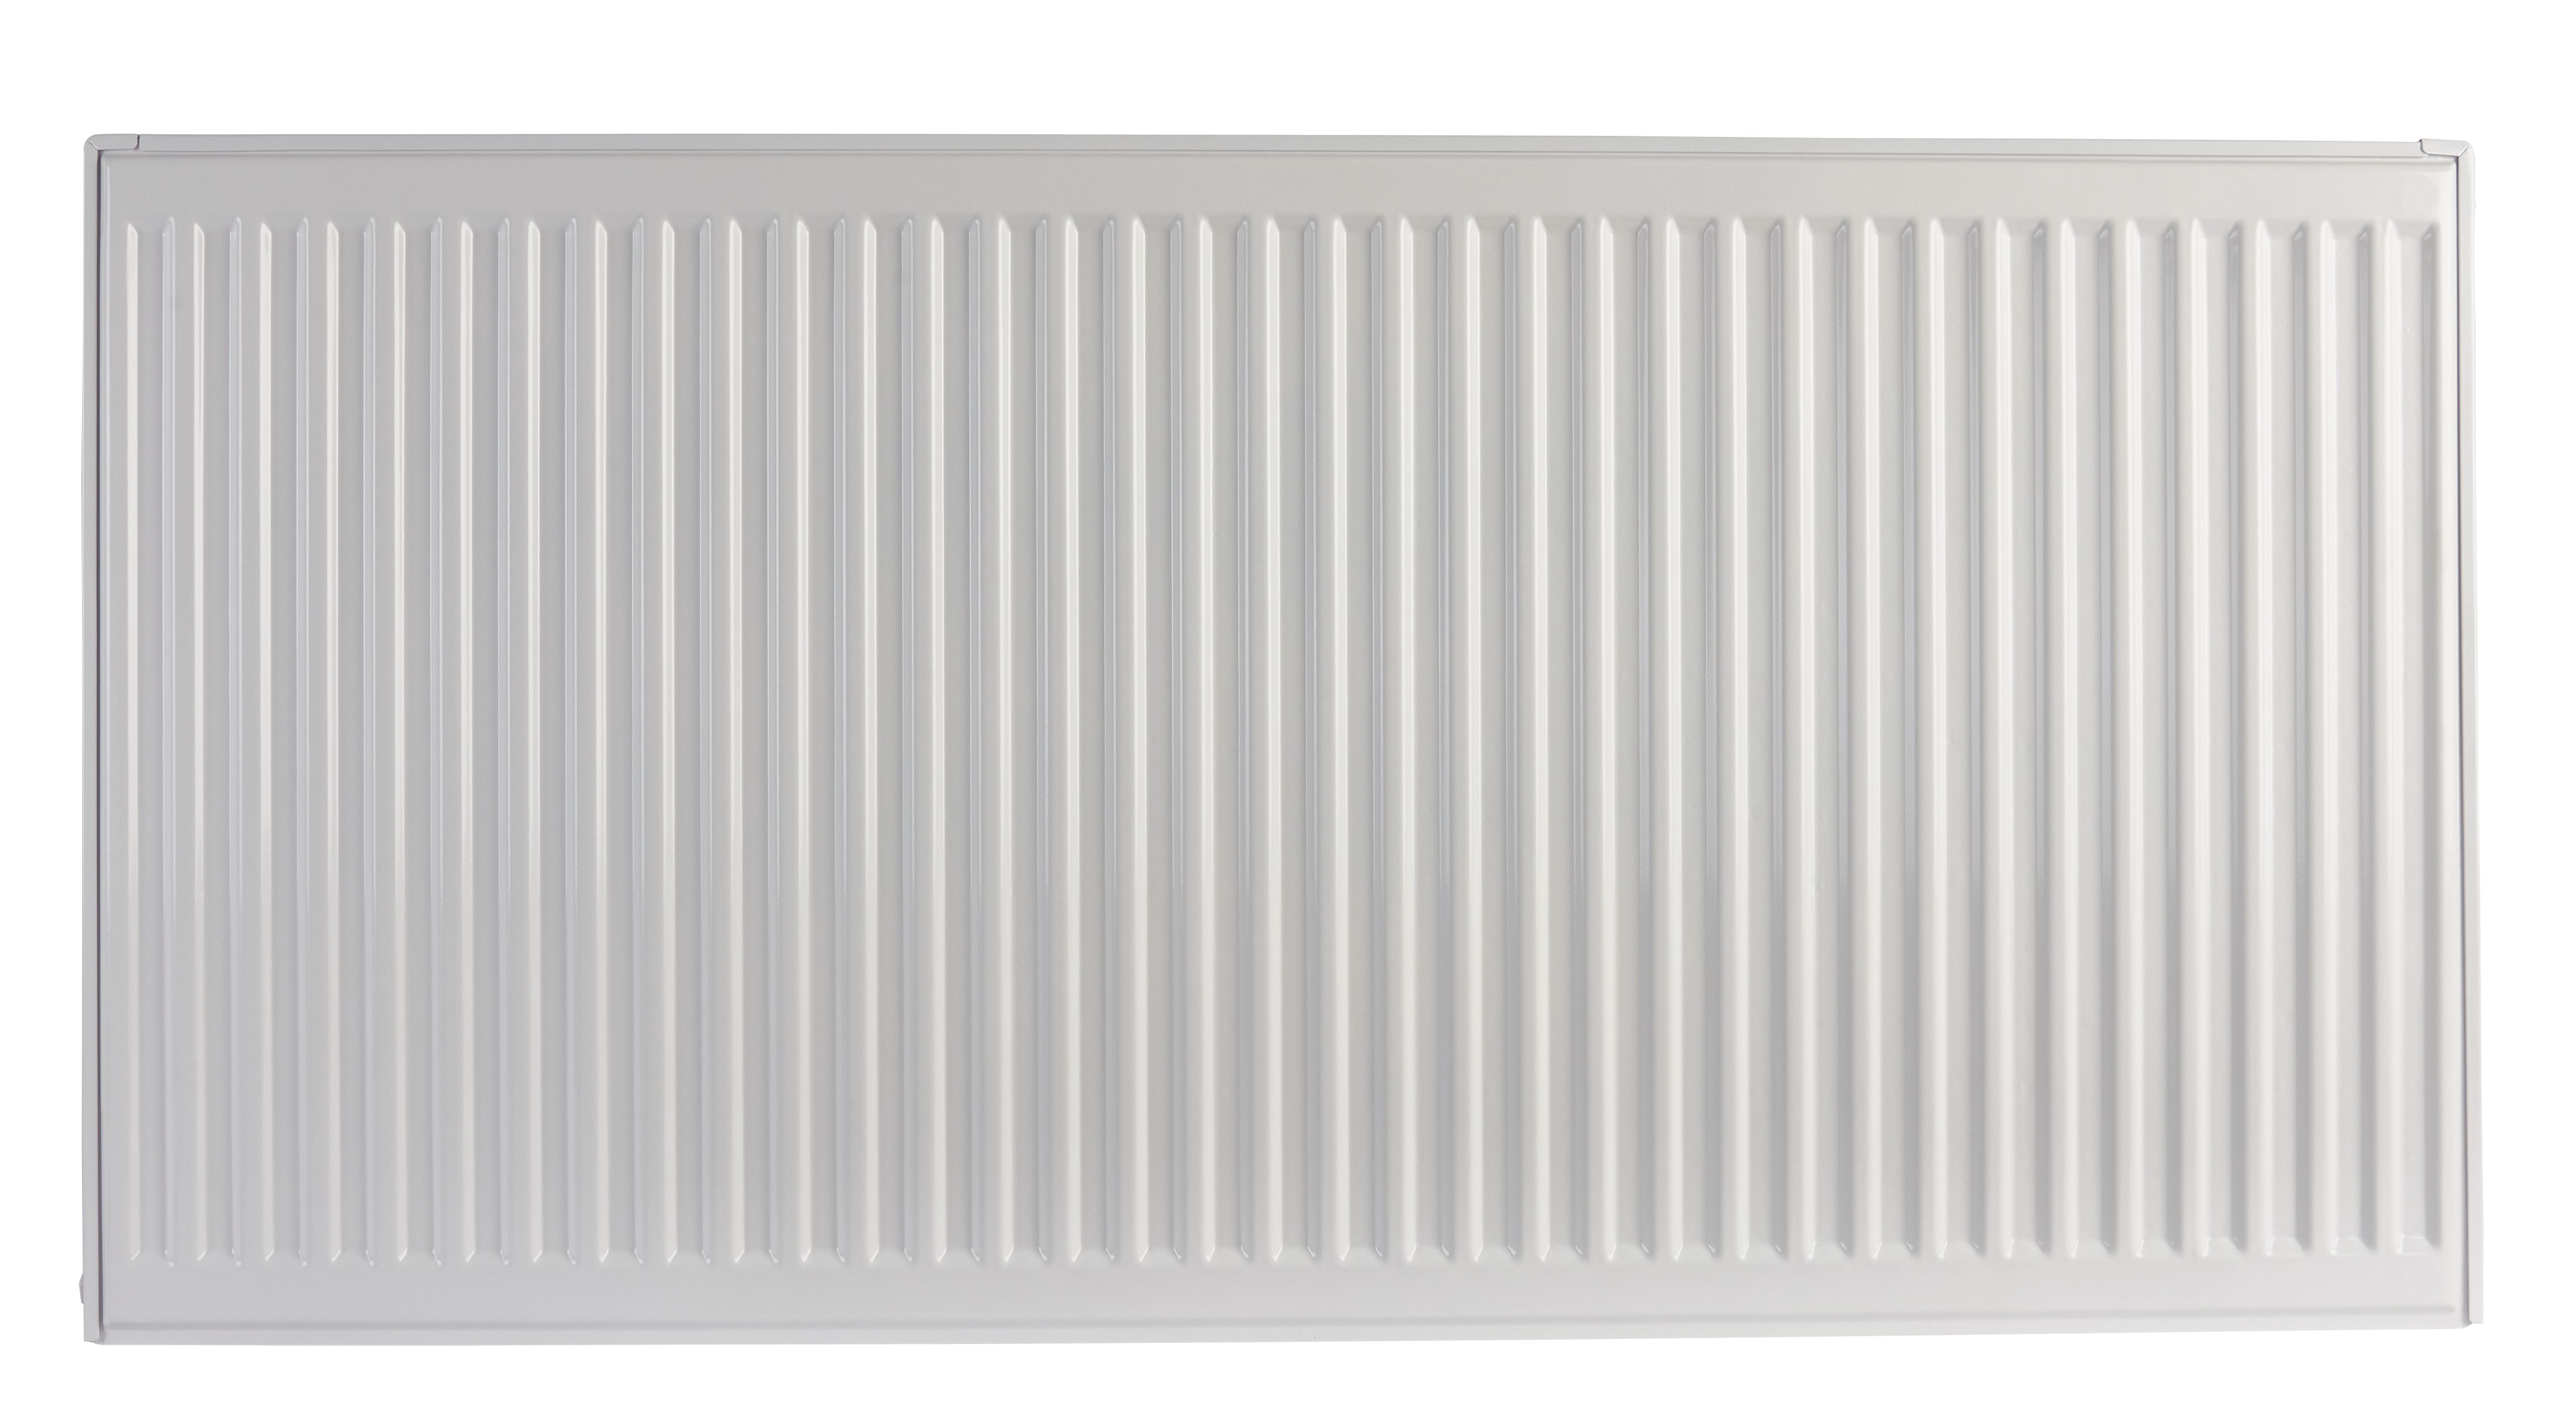 Homeline by Stelrad 700 x 1000mm Type 21 Double Panel Plus Single Convector Radiator